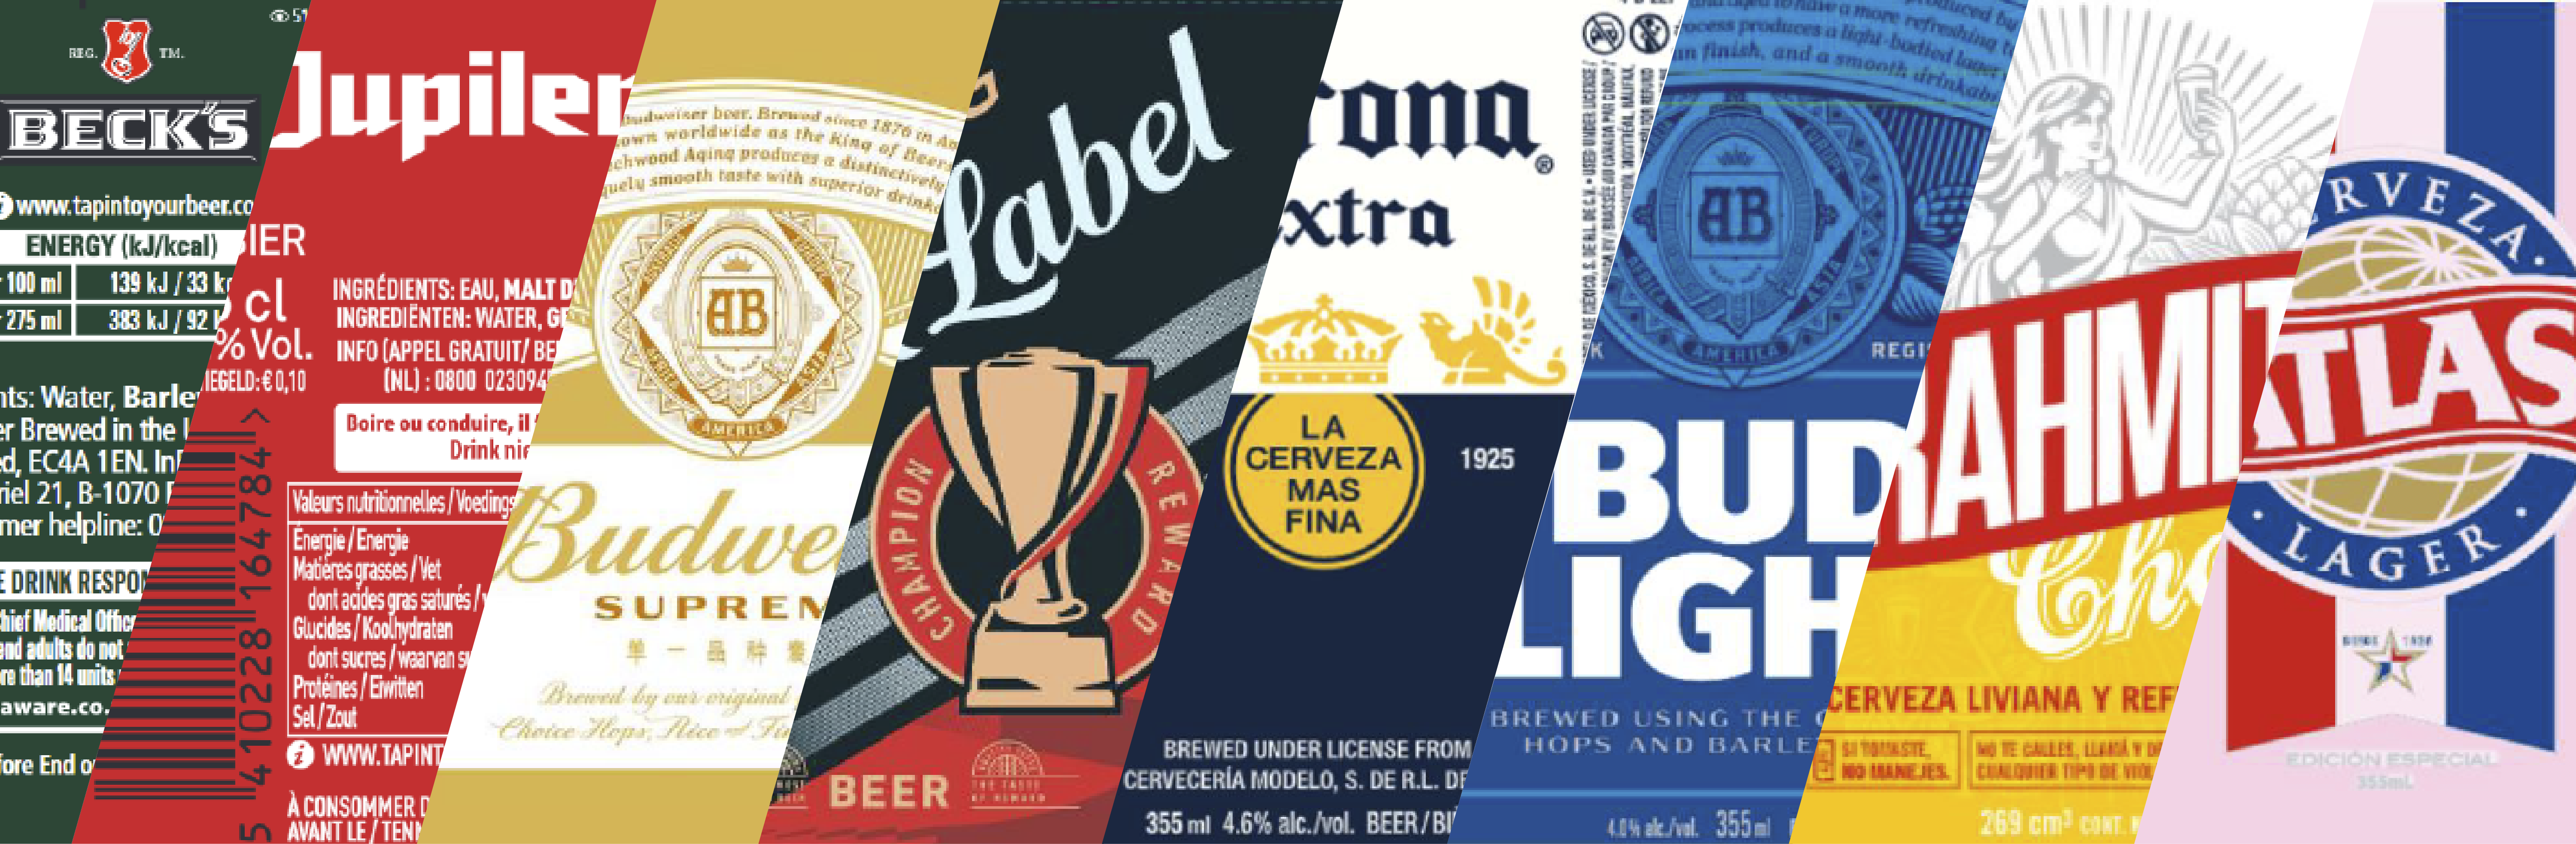 AB InBev is leading the industry with world’s largest voluntary beer guidance labeling initiative to promote Smart Drinking